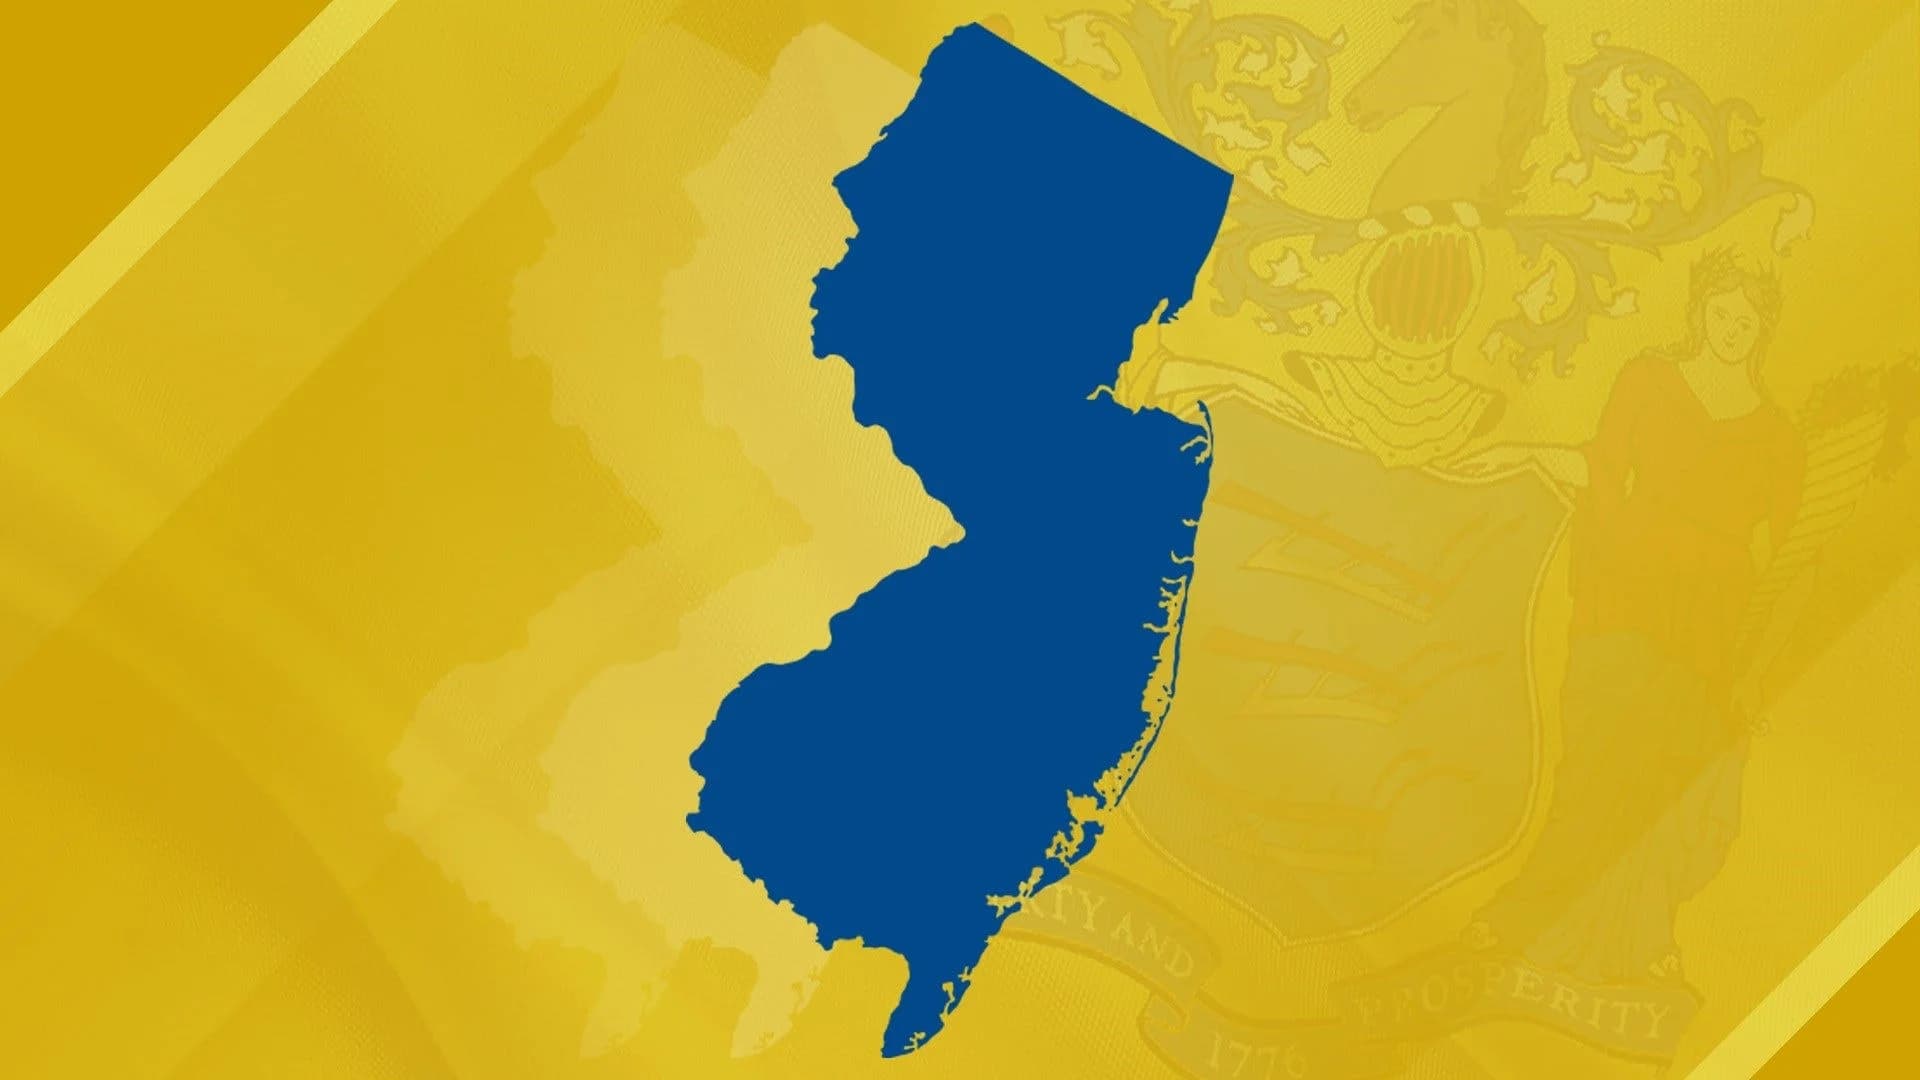 Study: New Jersey is 18th most charitable state in US